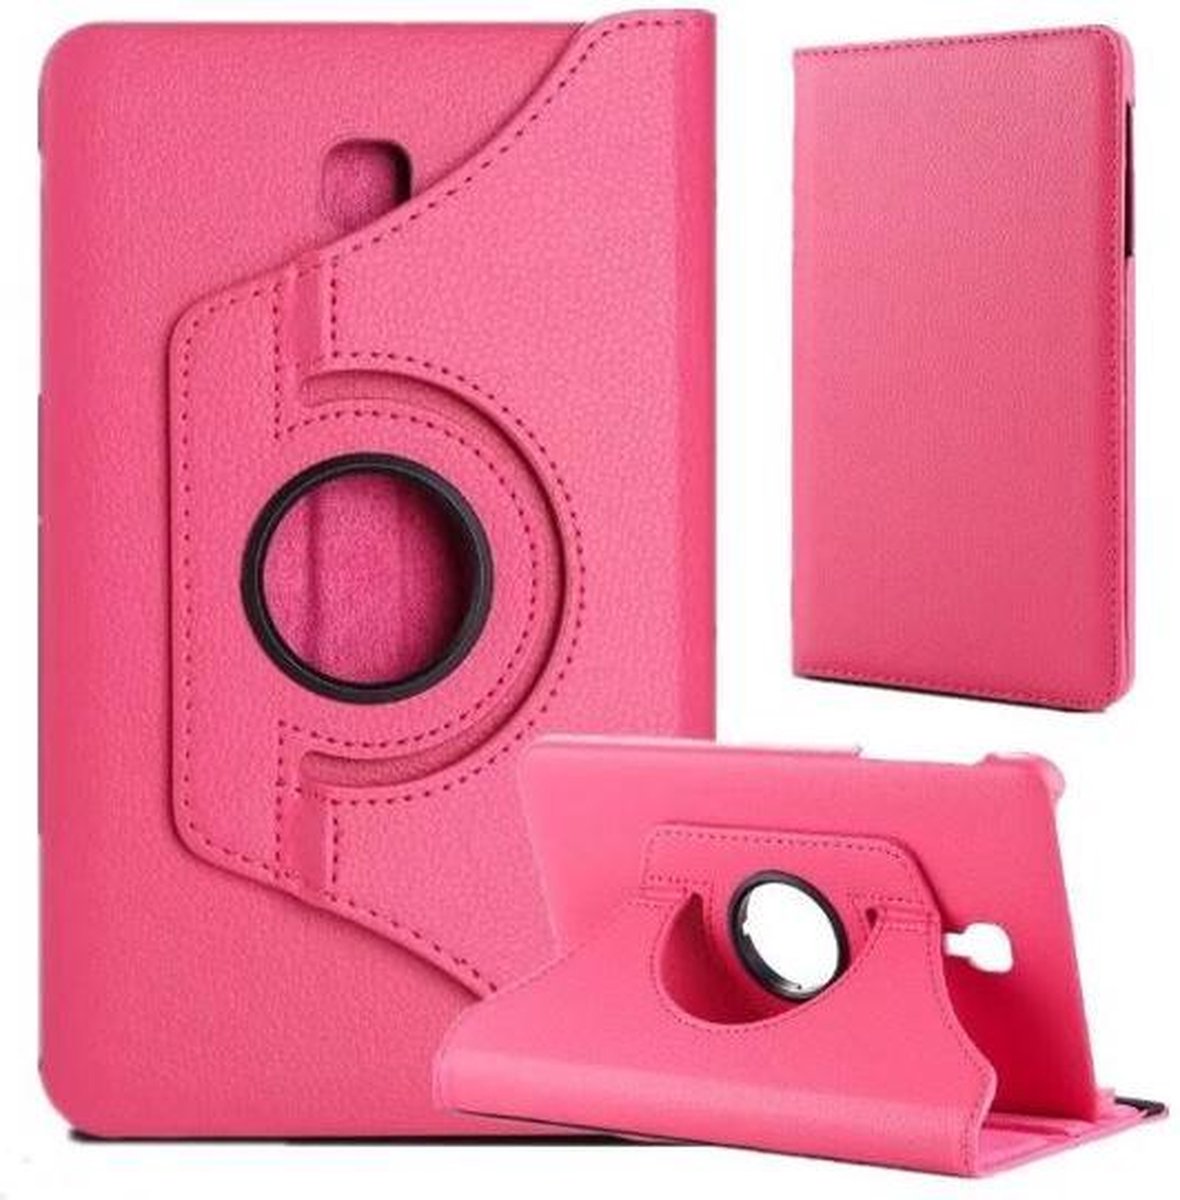 Xssive Tablet Hoes Case Cover 360° draaibaar voor Samsung Galaxy Tab A 8 inch 2017 T380 - Hot Pink